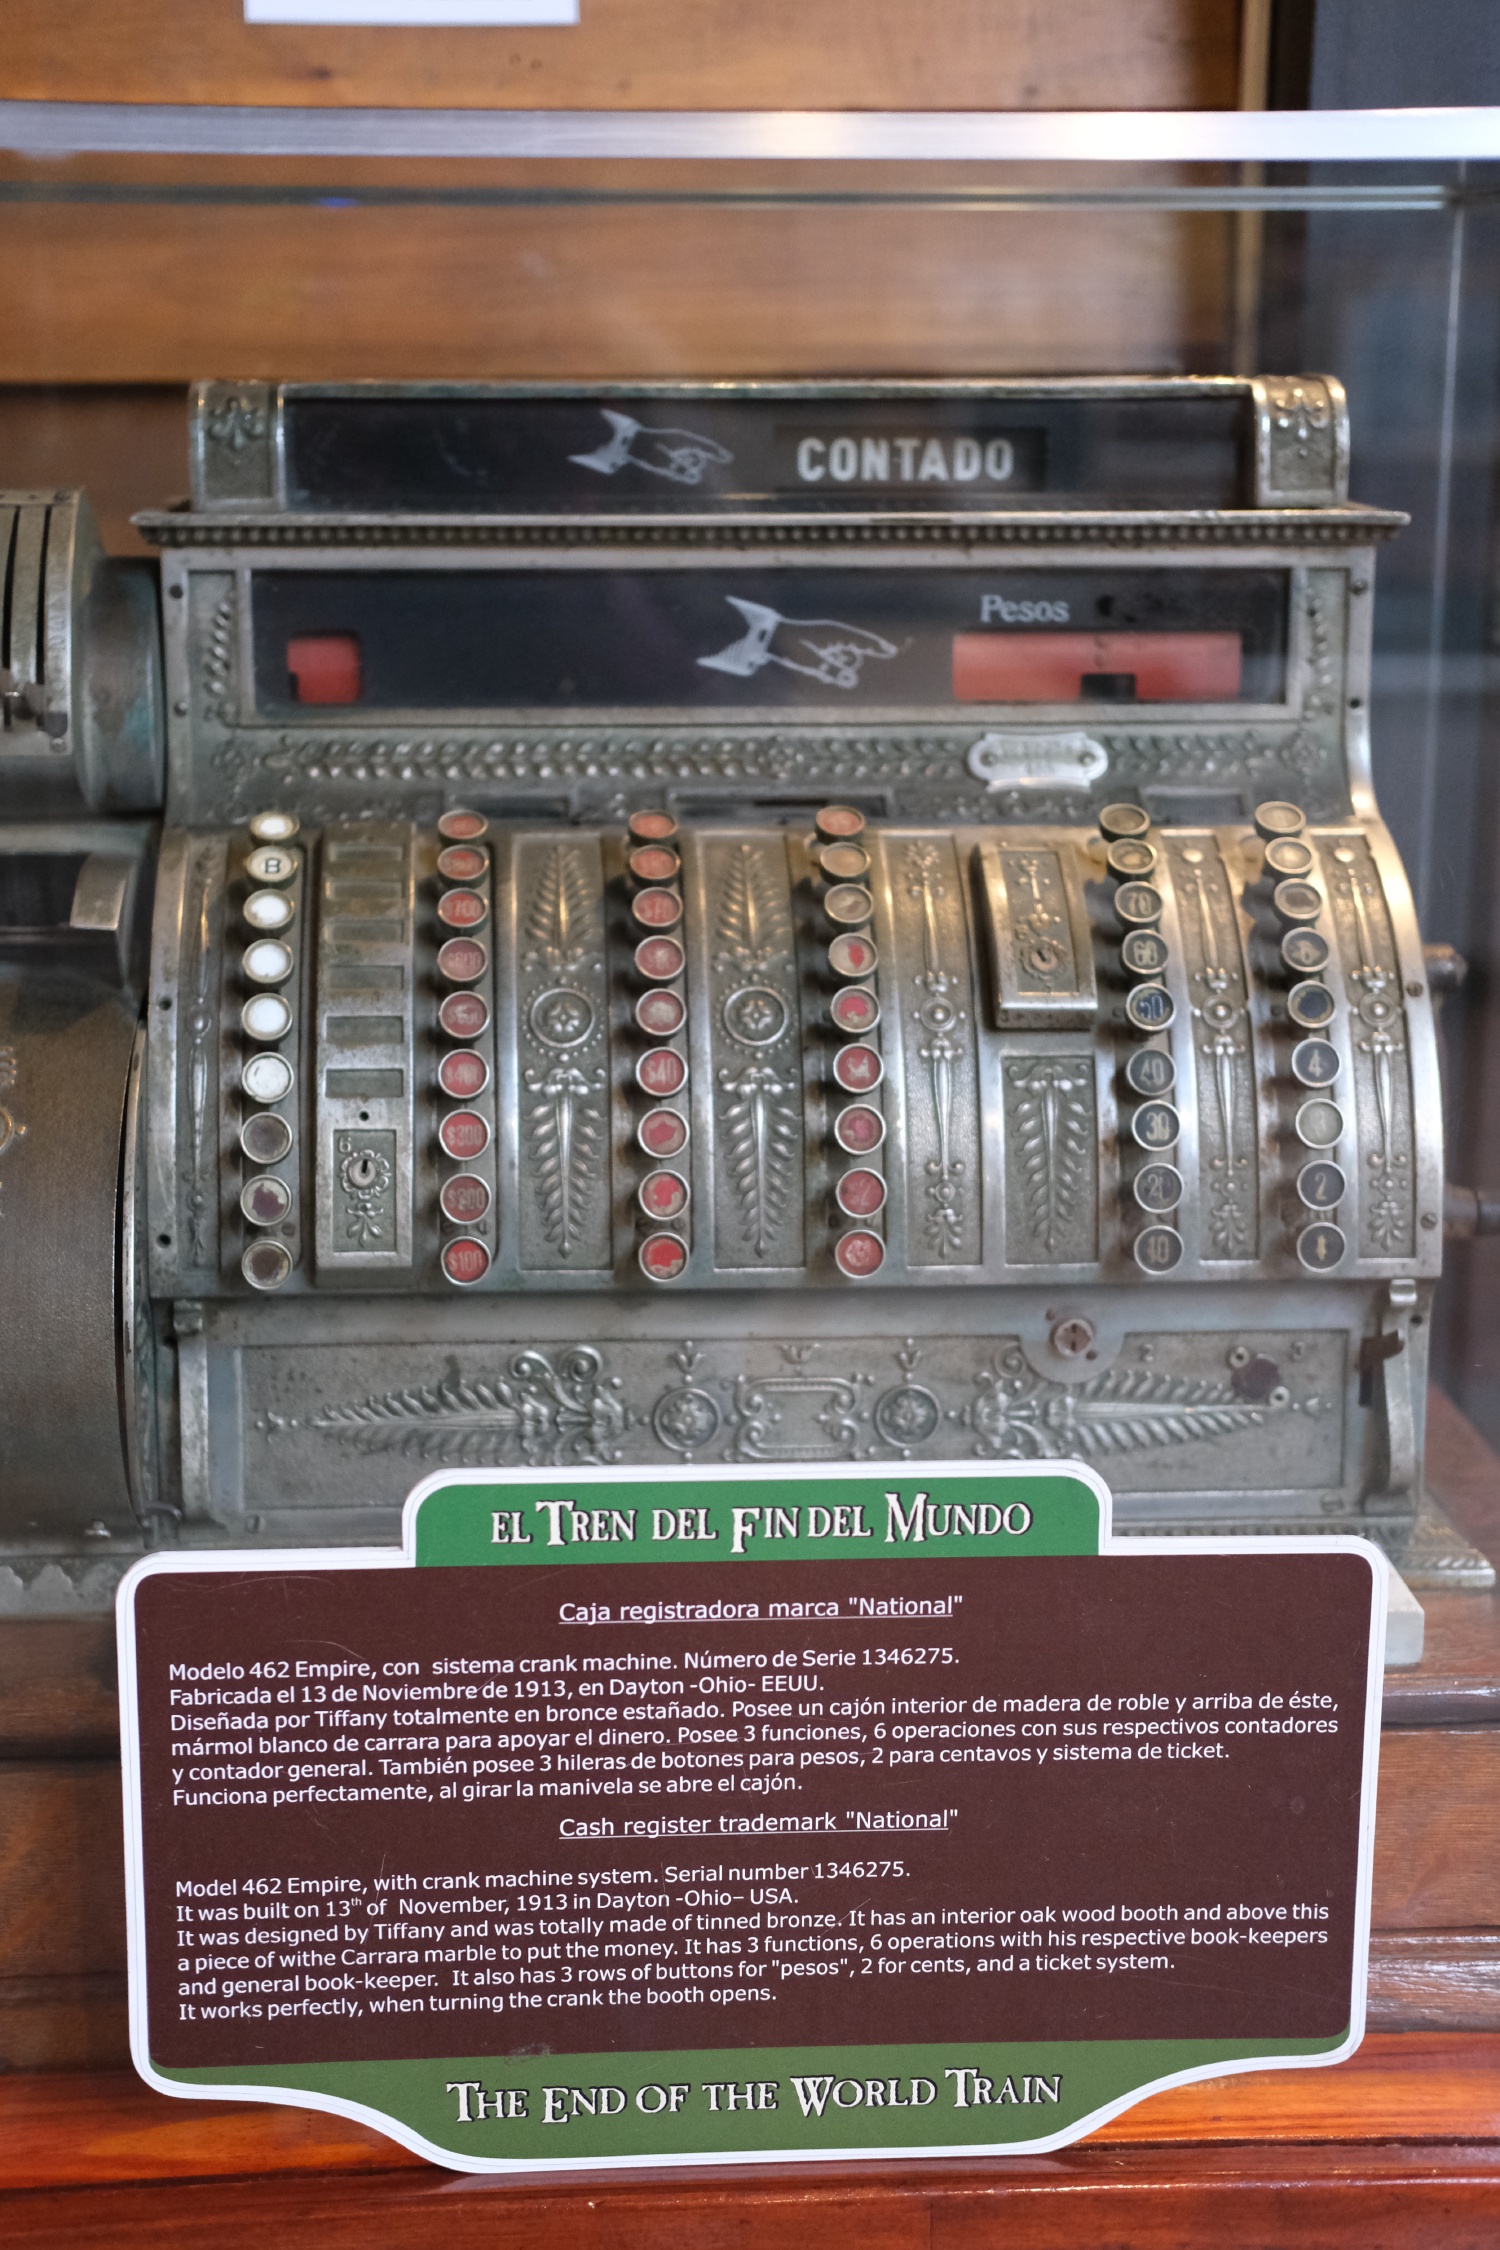 The cash register was designed by Tiffany! Cool stuff